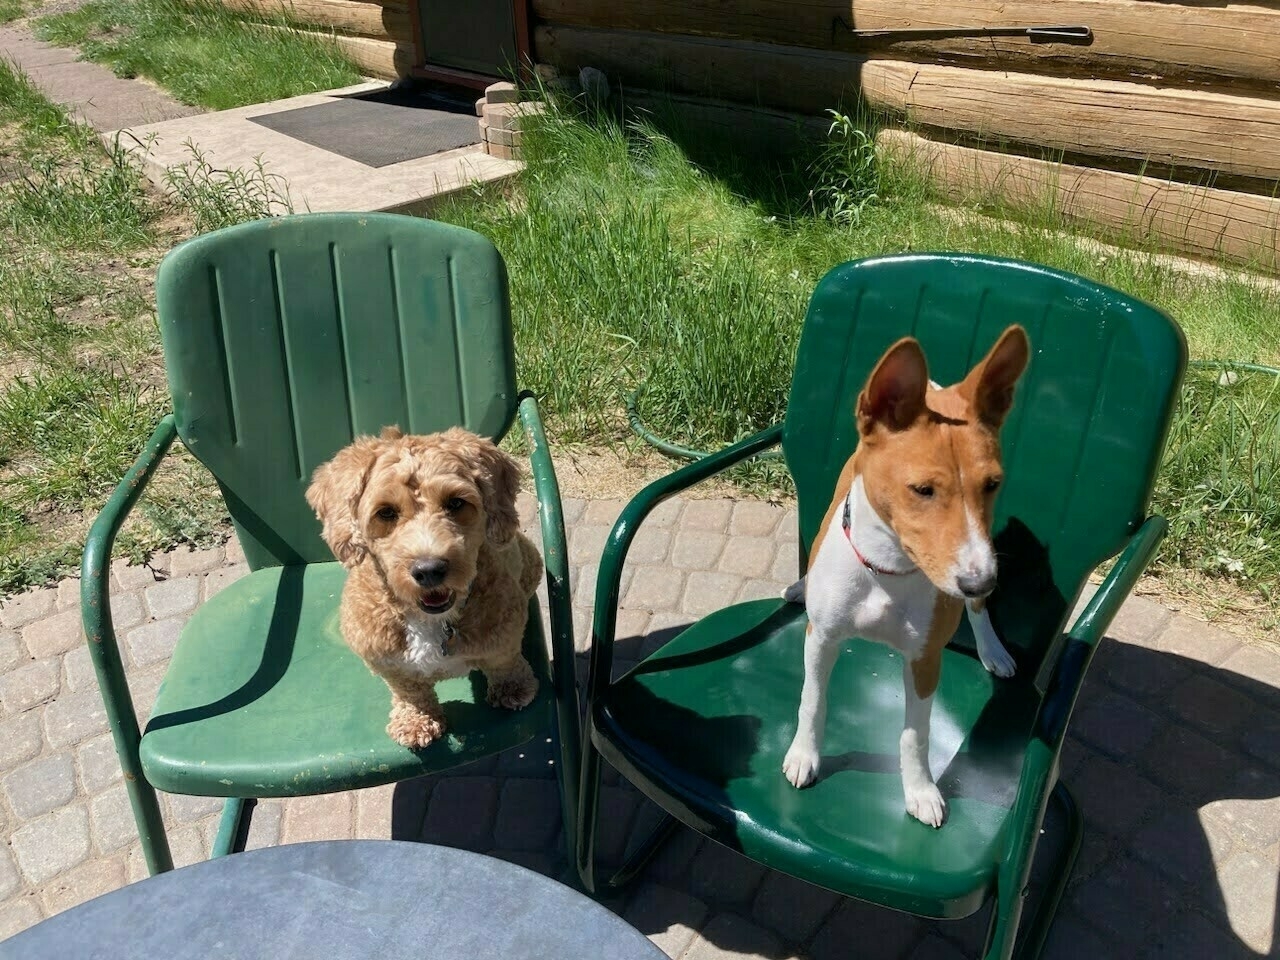 Basenji and Mini Goldendoodle dogs sitting in chairs